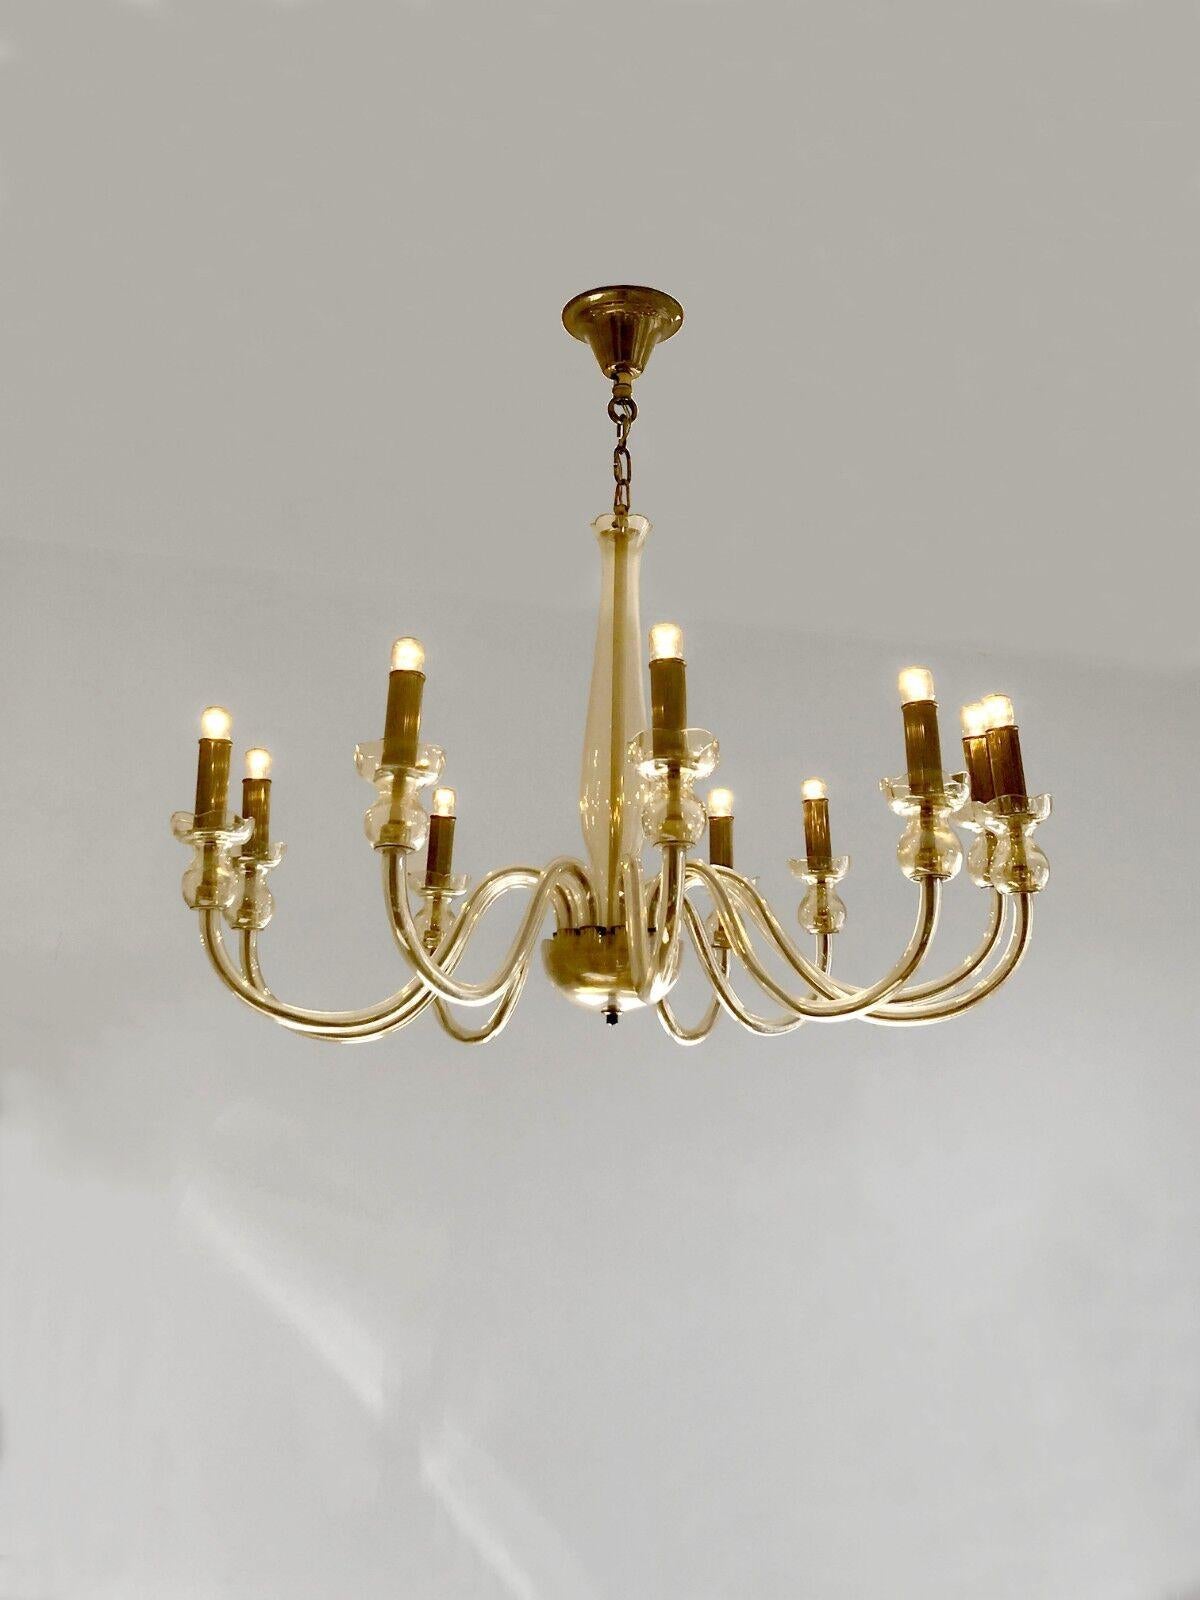 Neoclassical A Luxurious NEOCLASSICAL MURANO GLASS Ceiling Fixture by VERONESE, Italy, 1950 For Sale